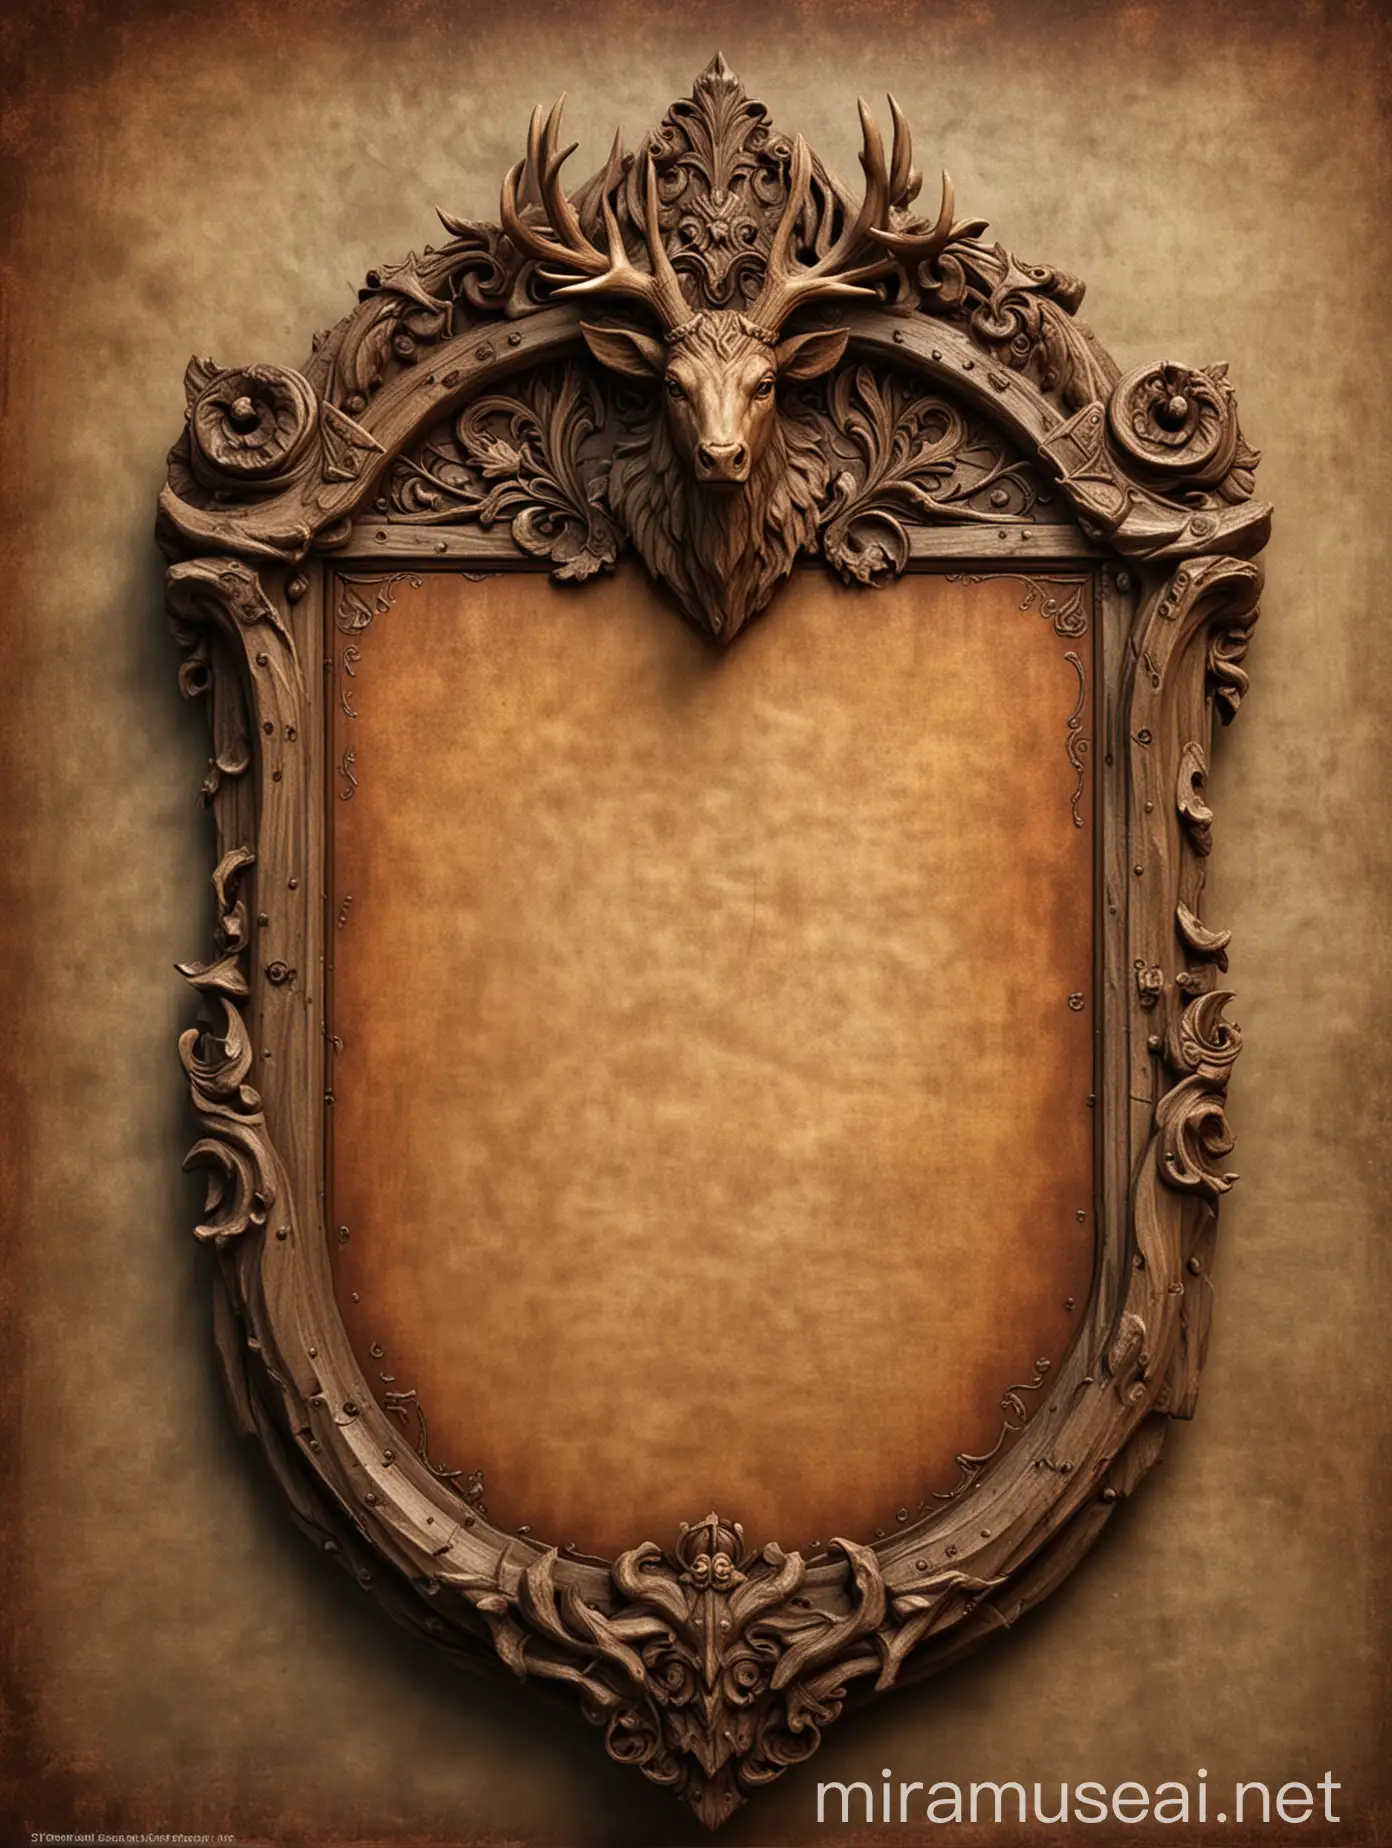 Create a banner image for a fantasy game guild. The image should depict a wooden notice board with an ornate top section that has a shield-shaped crest in the center featuring a stag's head. The notice board itself should be blank, allowing for text to be added later.  The overall dimensions of the image should be 1920x1080 pixels. Use a warm, earthy color palette with natural wood tones. Include detailed textures and weathering effects to make the notice board look authentic and aged. Pay close attention to lighting and shadows to make the design look realistic and three-dimensional.  The focus should be on the ornate top section and the blank notice board area. Avoid overly busy or cluttered backgrounds that would distract from the main elements.  Provide the image in a high-quality format (e.g. PNG) suitable for use in a video game or website.